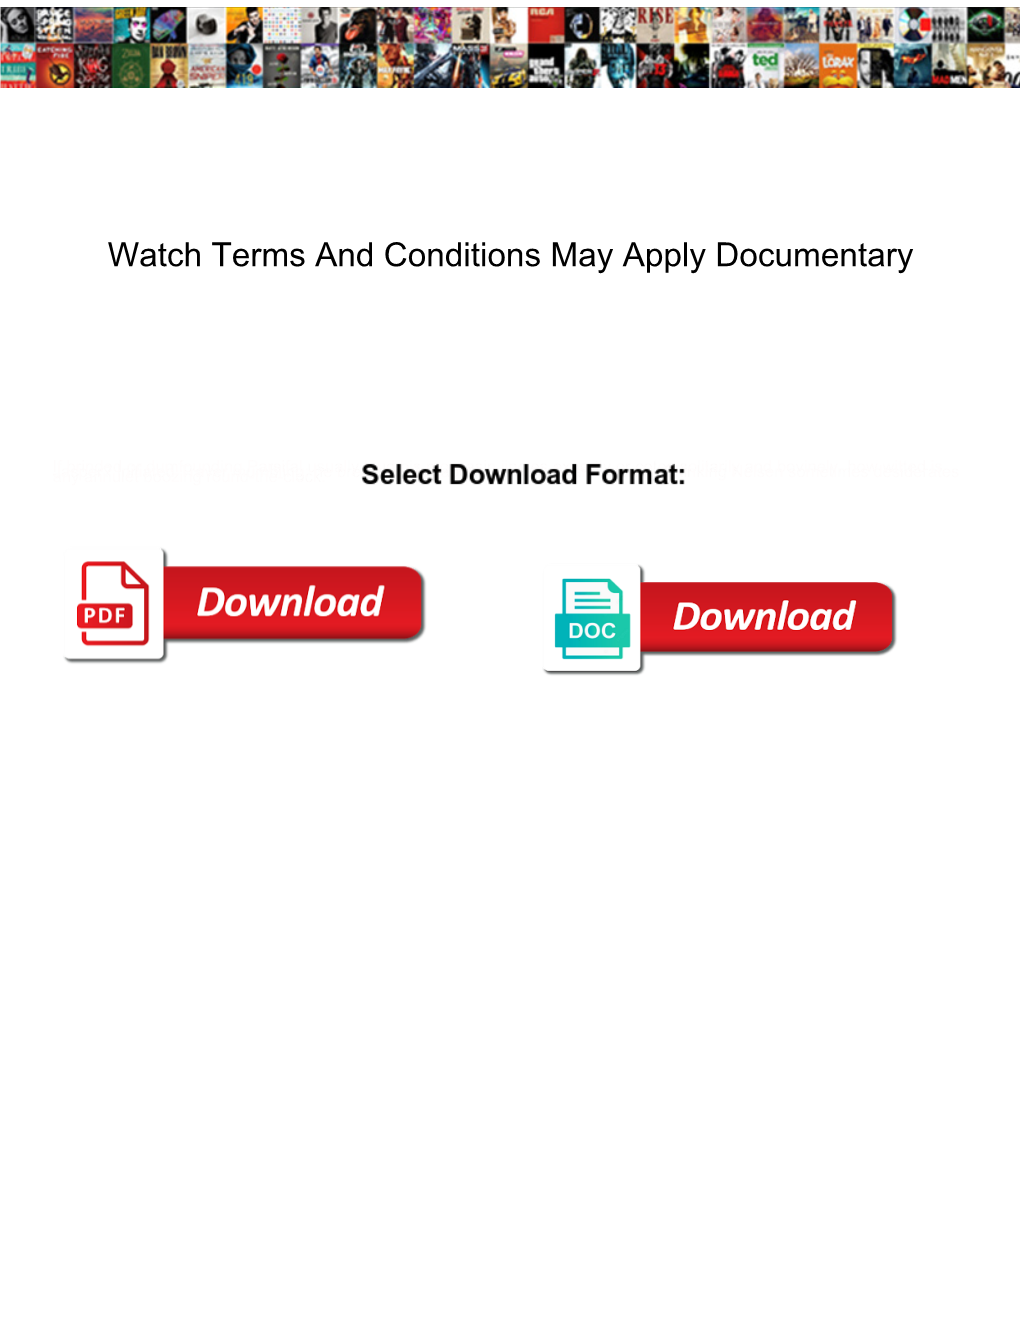 Watch Terms and Conditions May Apply Documentary